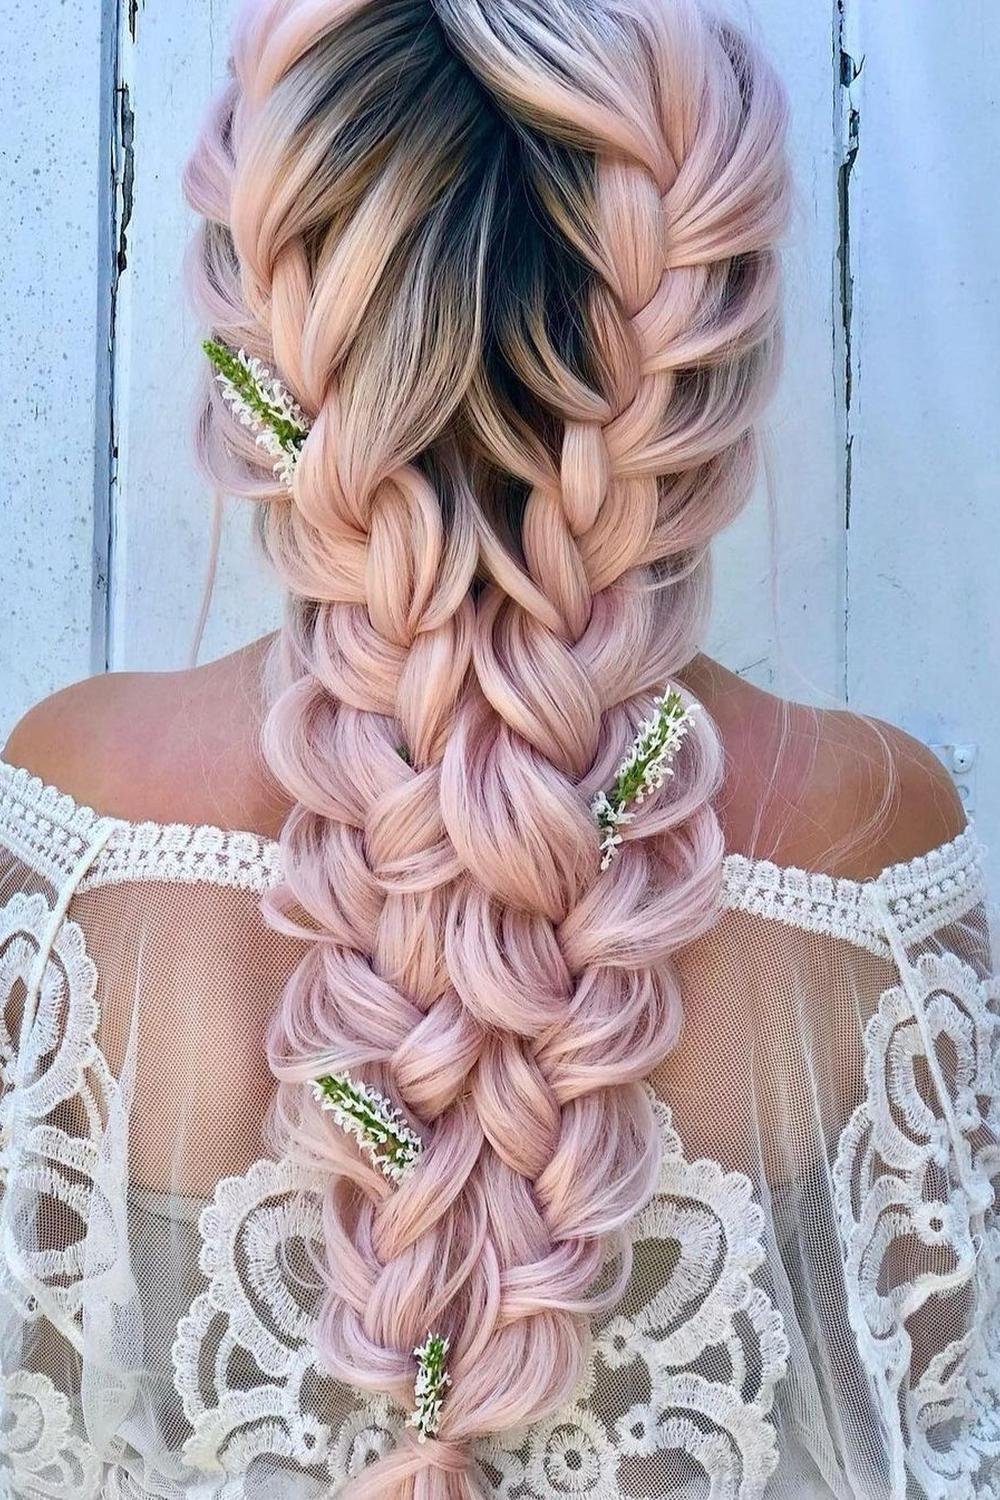 17 - Picture of Braided Hairstyles